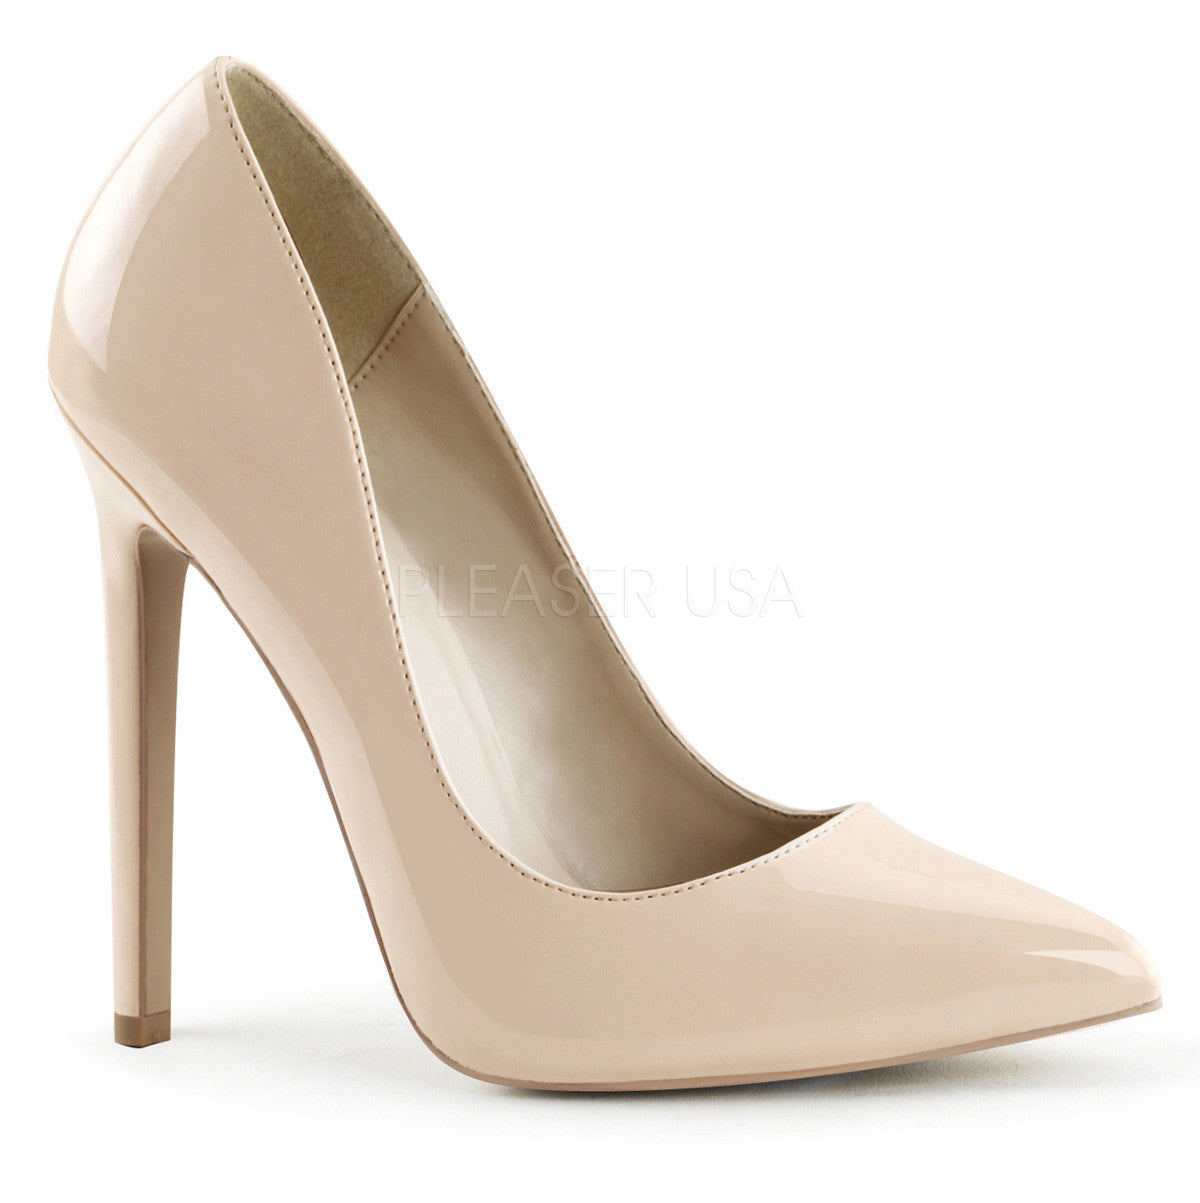 Pleaser SEXY-20 Nude Patent Pointed Toe Pumps - Shoecup.com